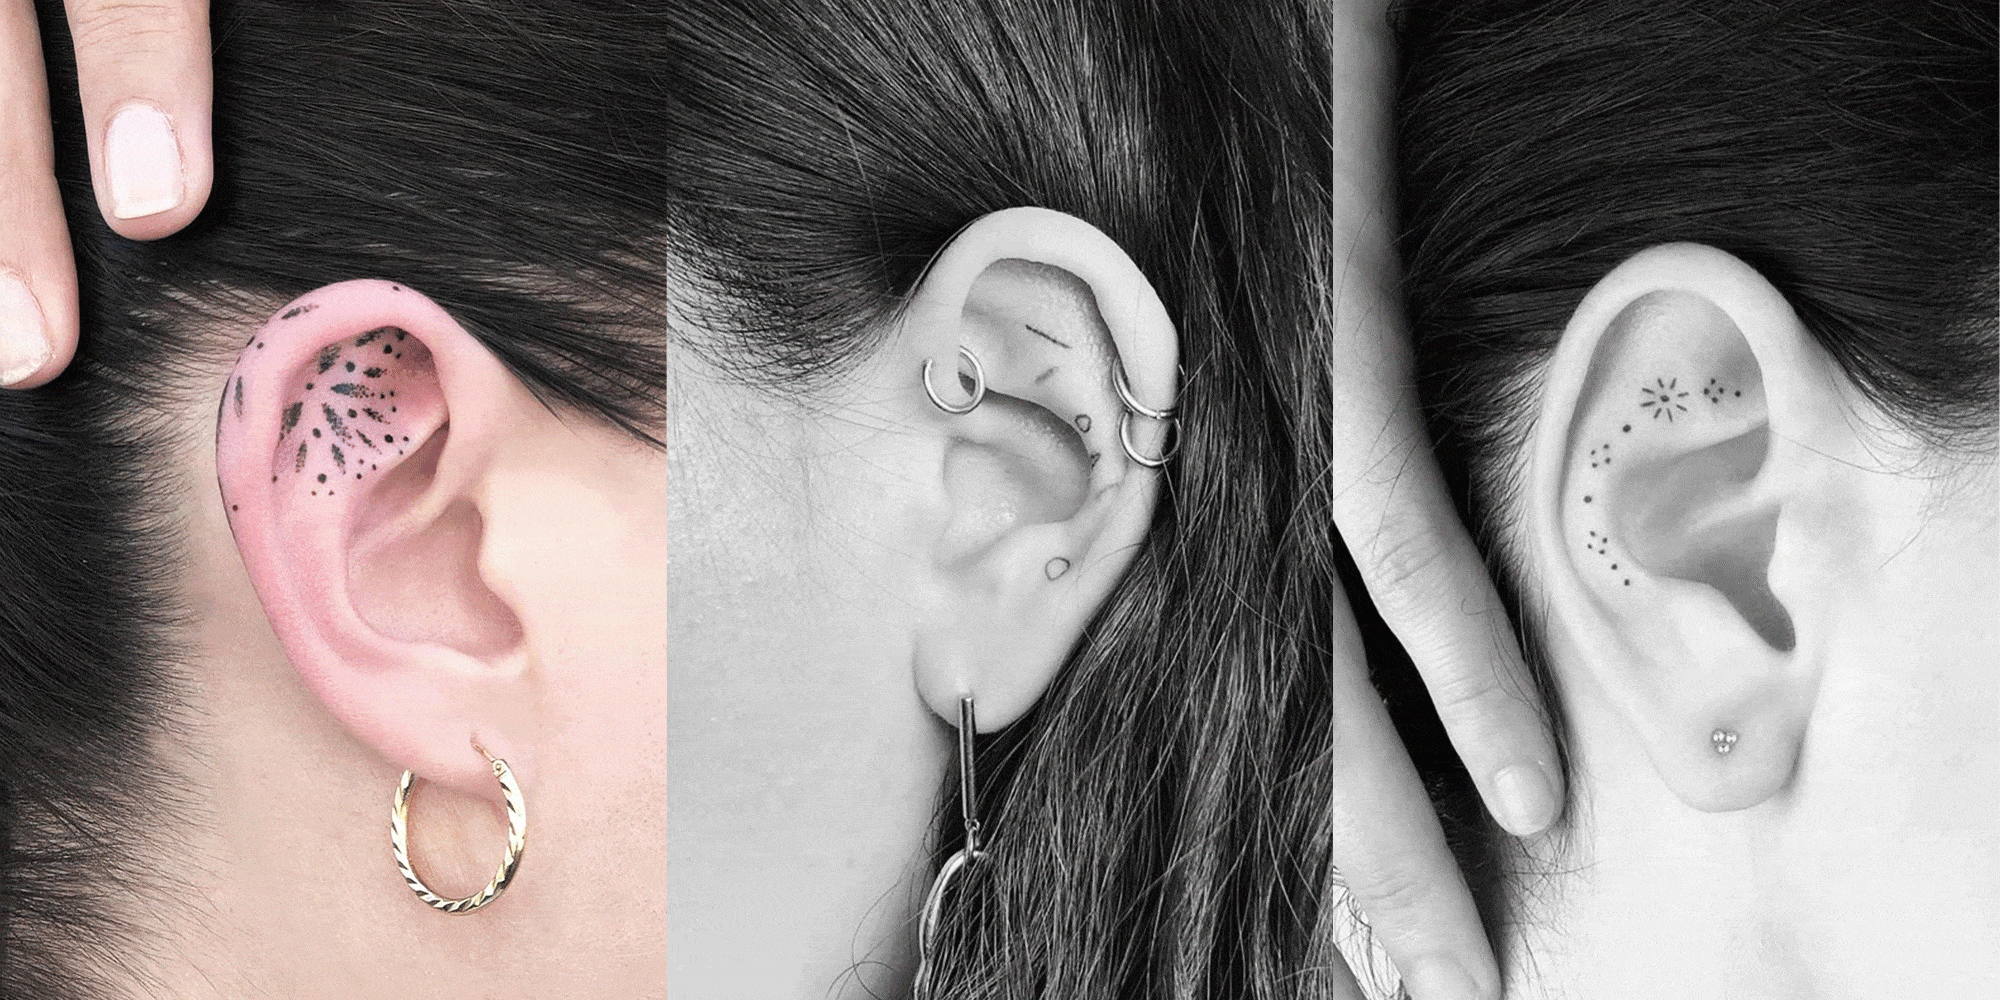 20 Ear Tattoos and Designs for 2022 - Behind the Ear Tattoo Ideas